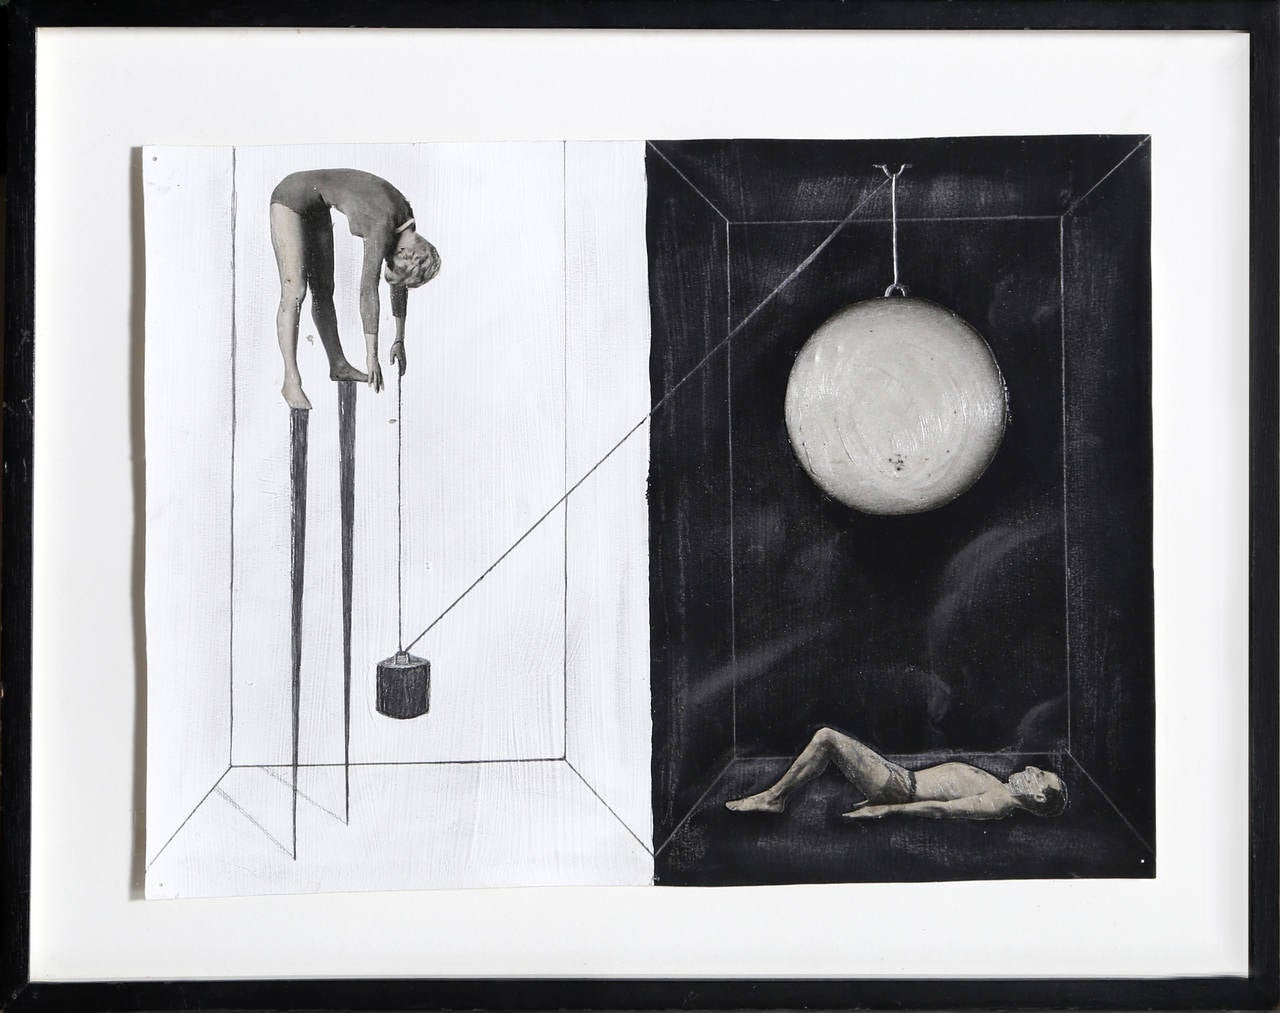 Untitled - Pulley System, Surrealist Mixed Media on Paper by Zizi Raymond